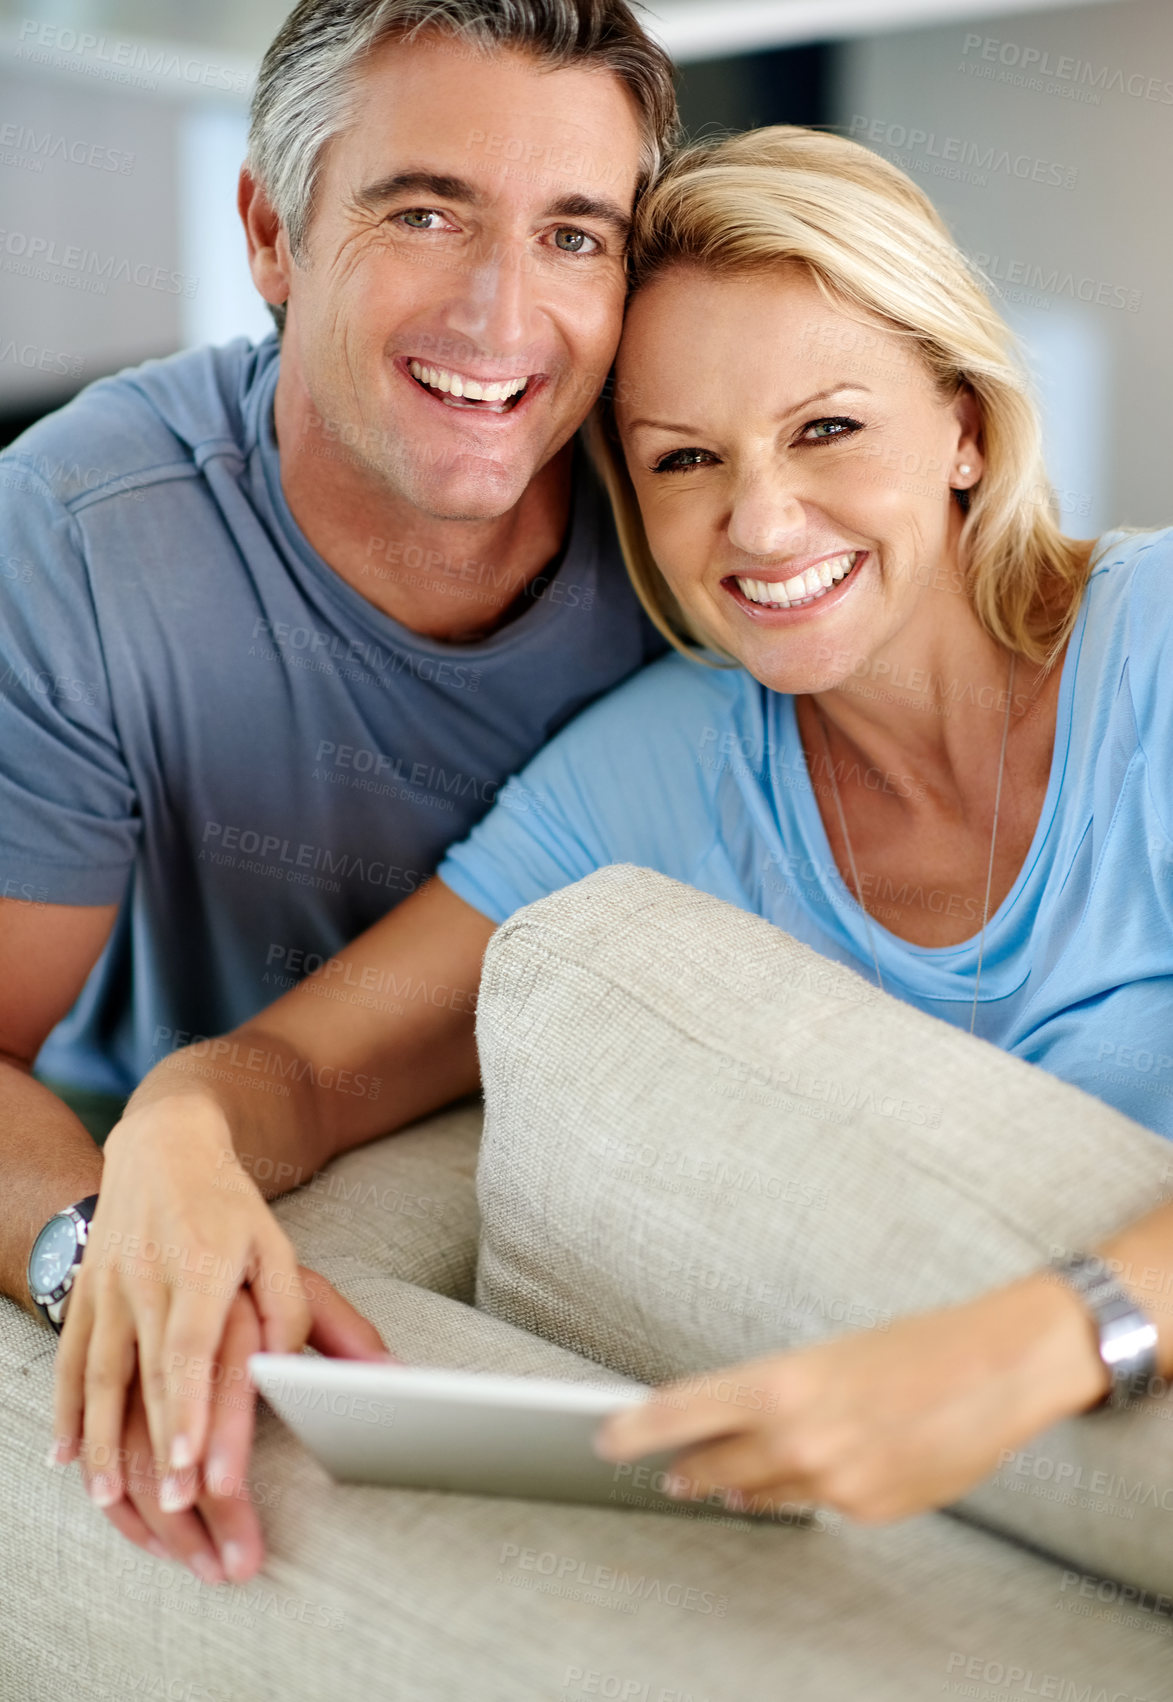 Buy stock photo Cropped portrait of an affectionate couple smiling while using a digital tablet at home